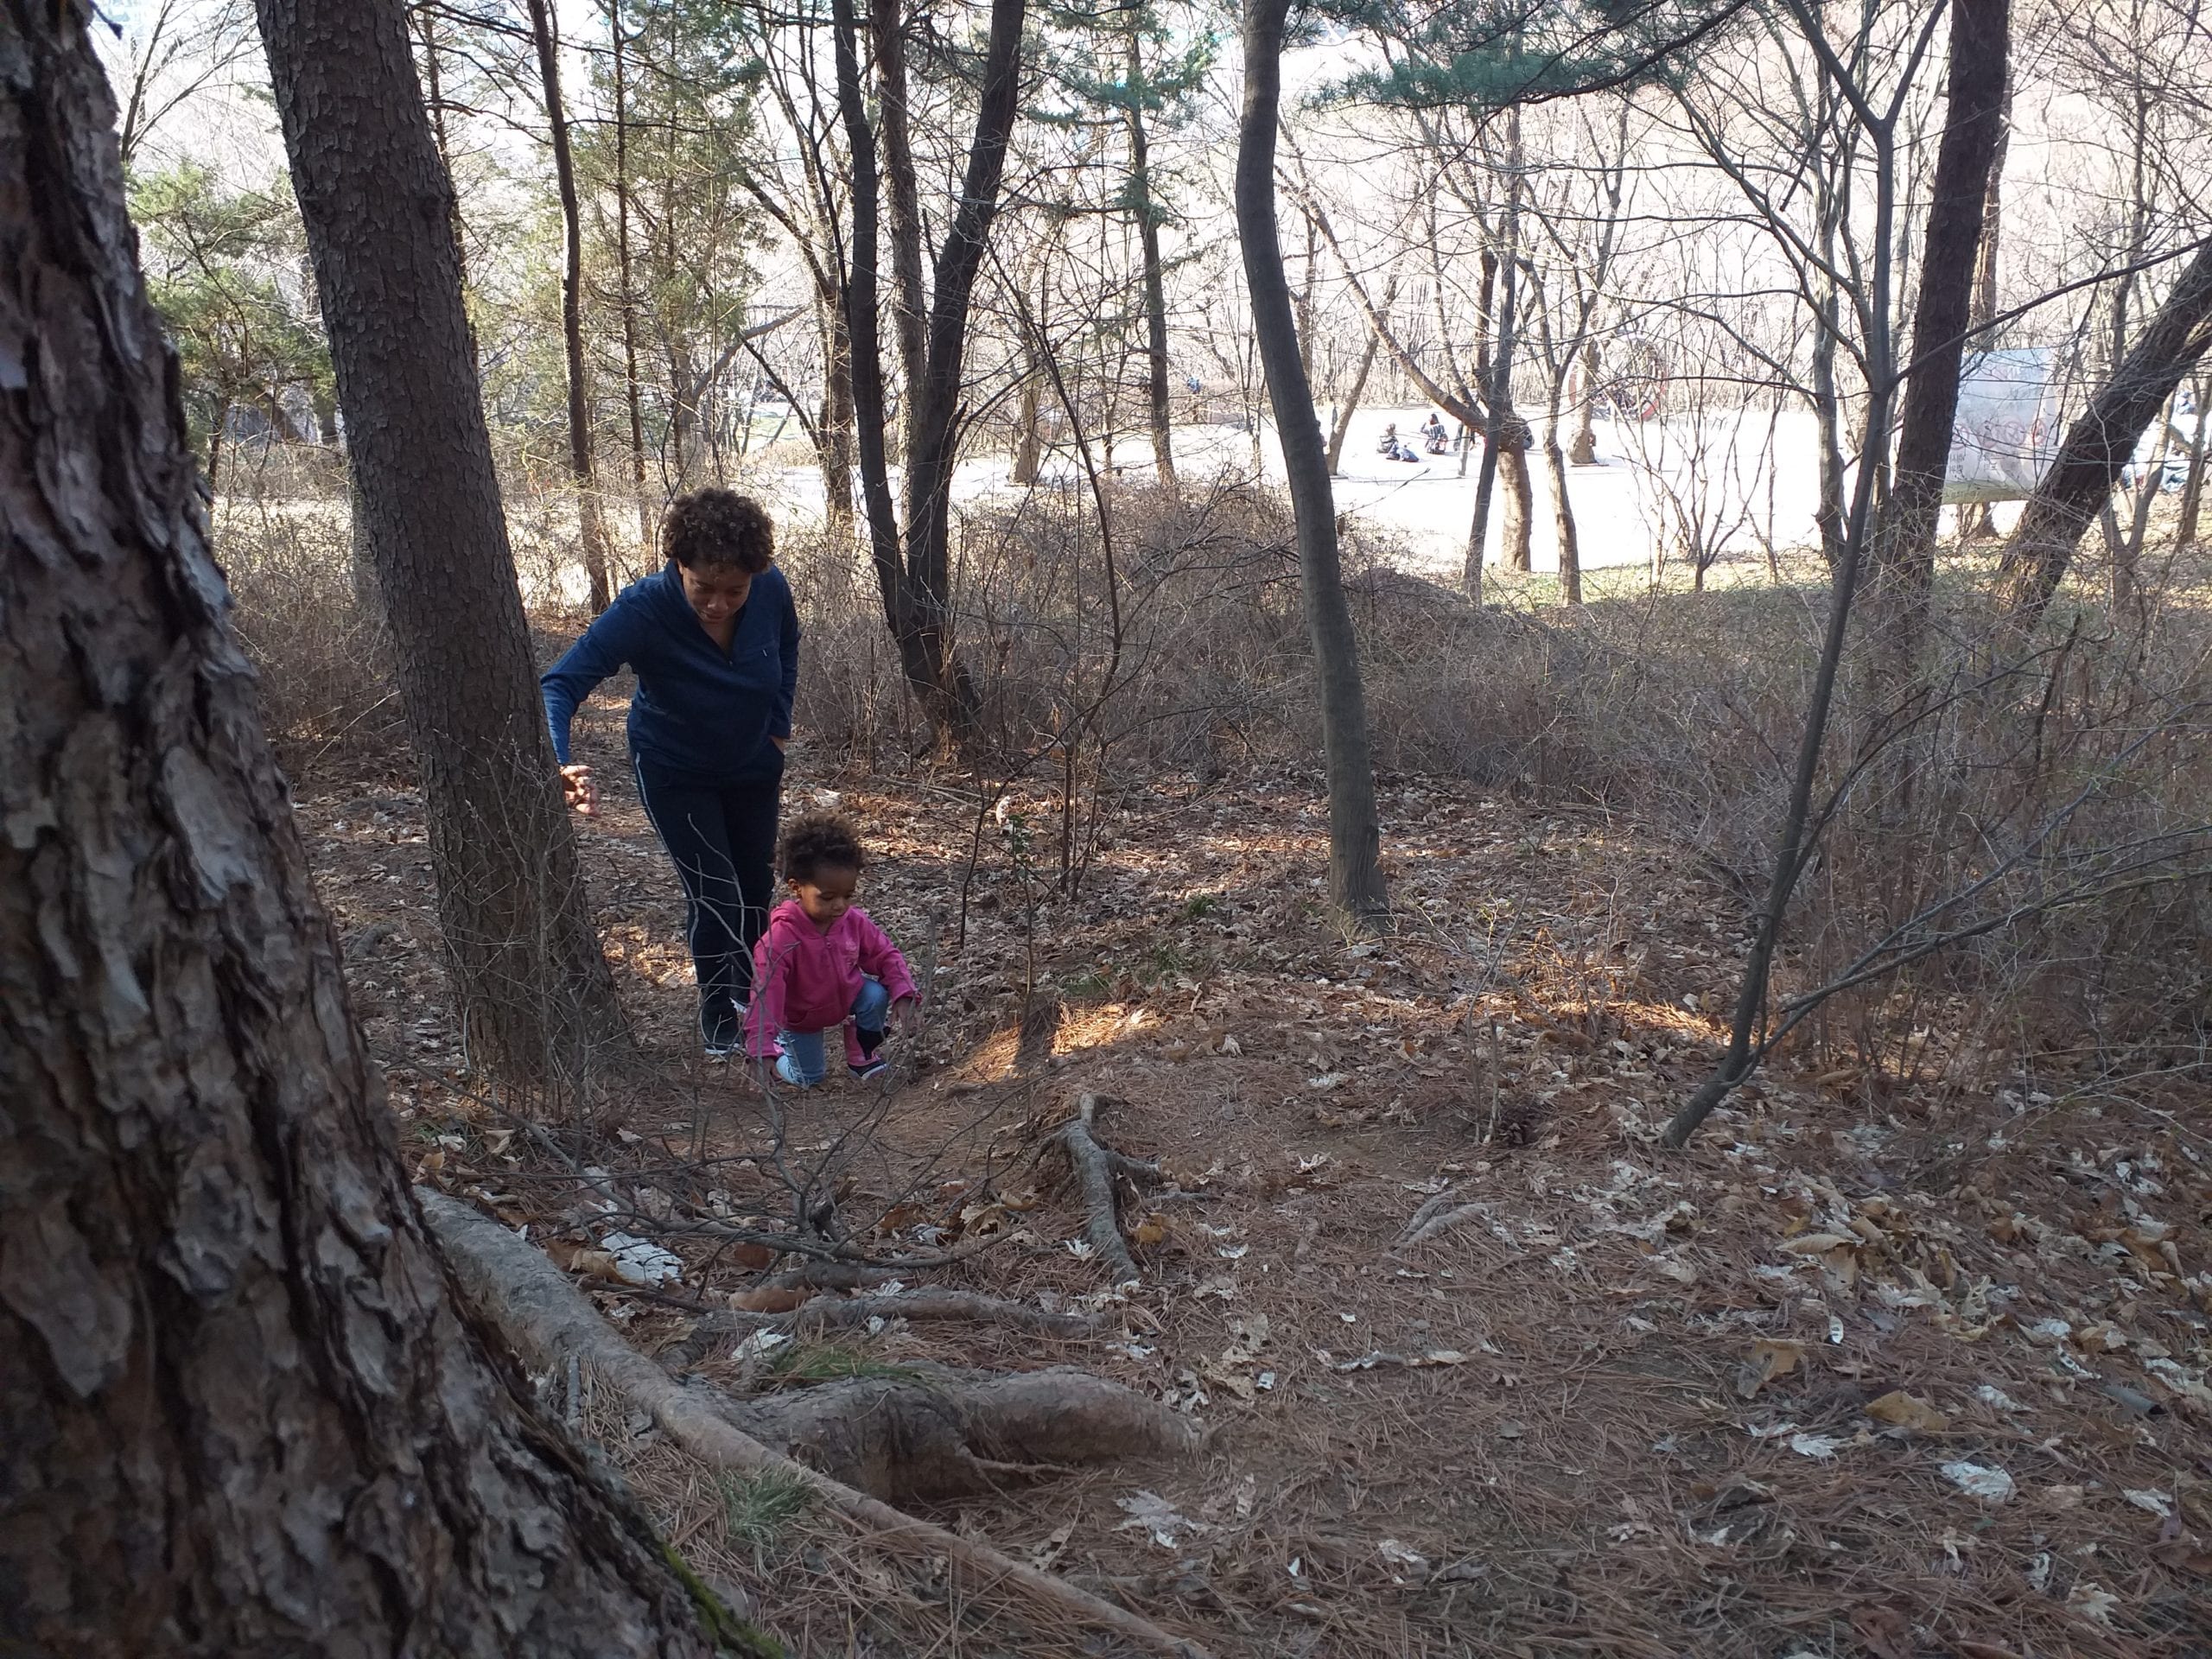 sherika-and-baby-keilah-trott-bailey-hiking-in-korea how does the trott bailey family travels the world